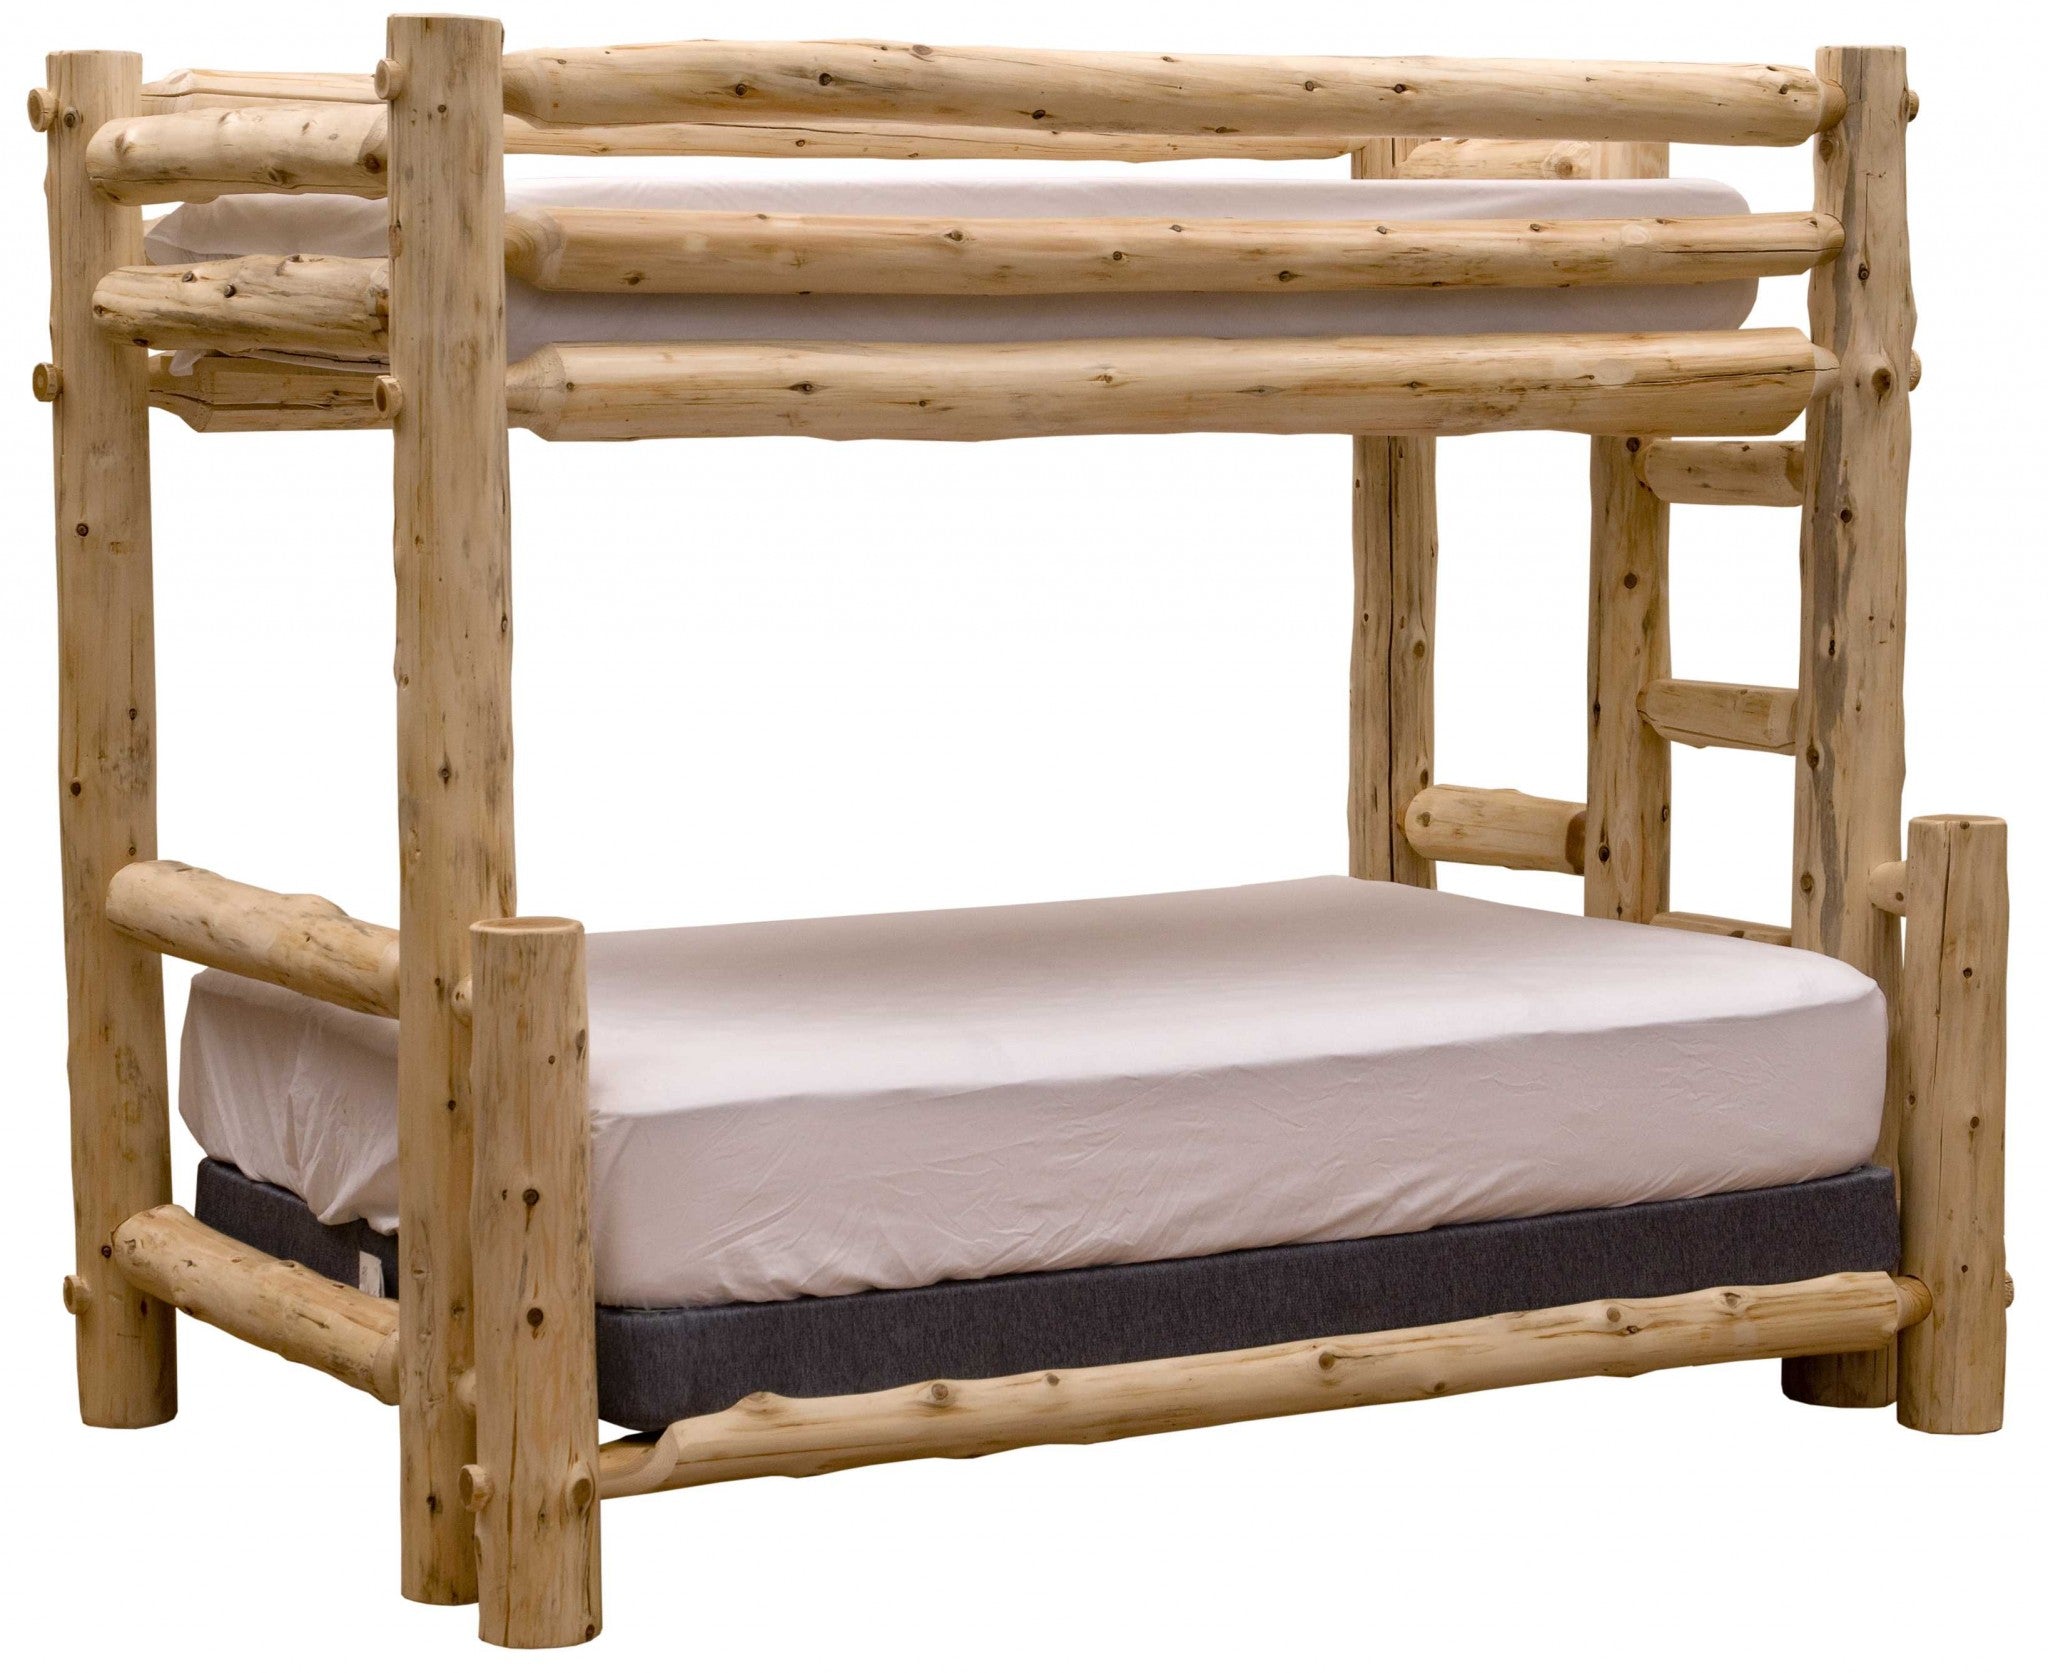 Rustic and Natural Cedar Double and Single Ladder Right Log Bunk Bed